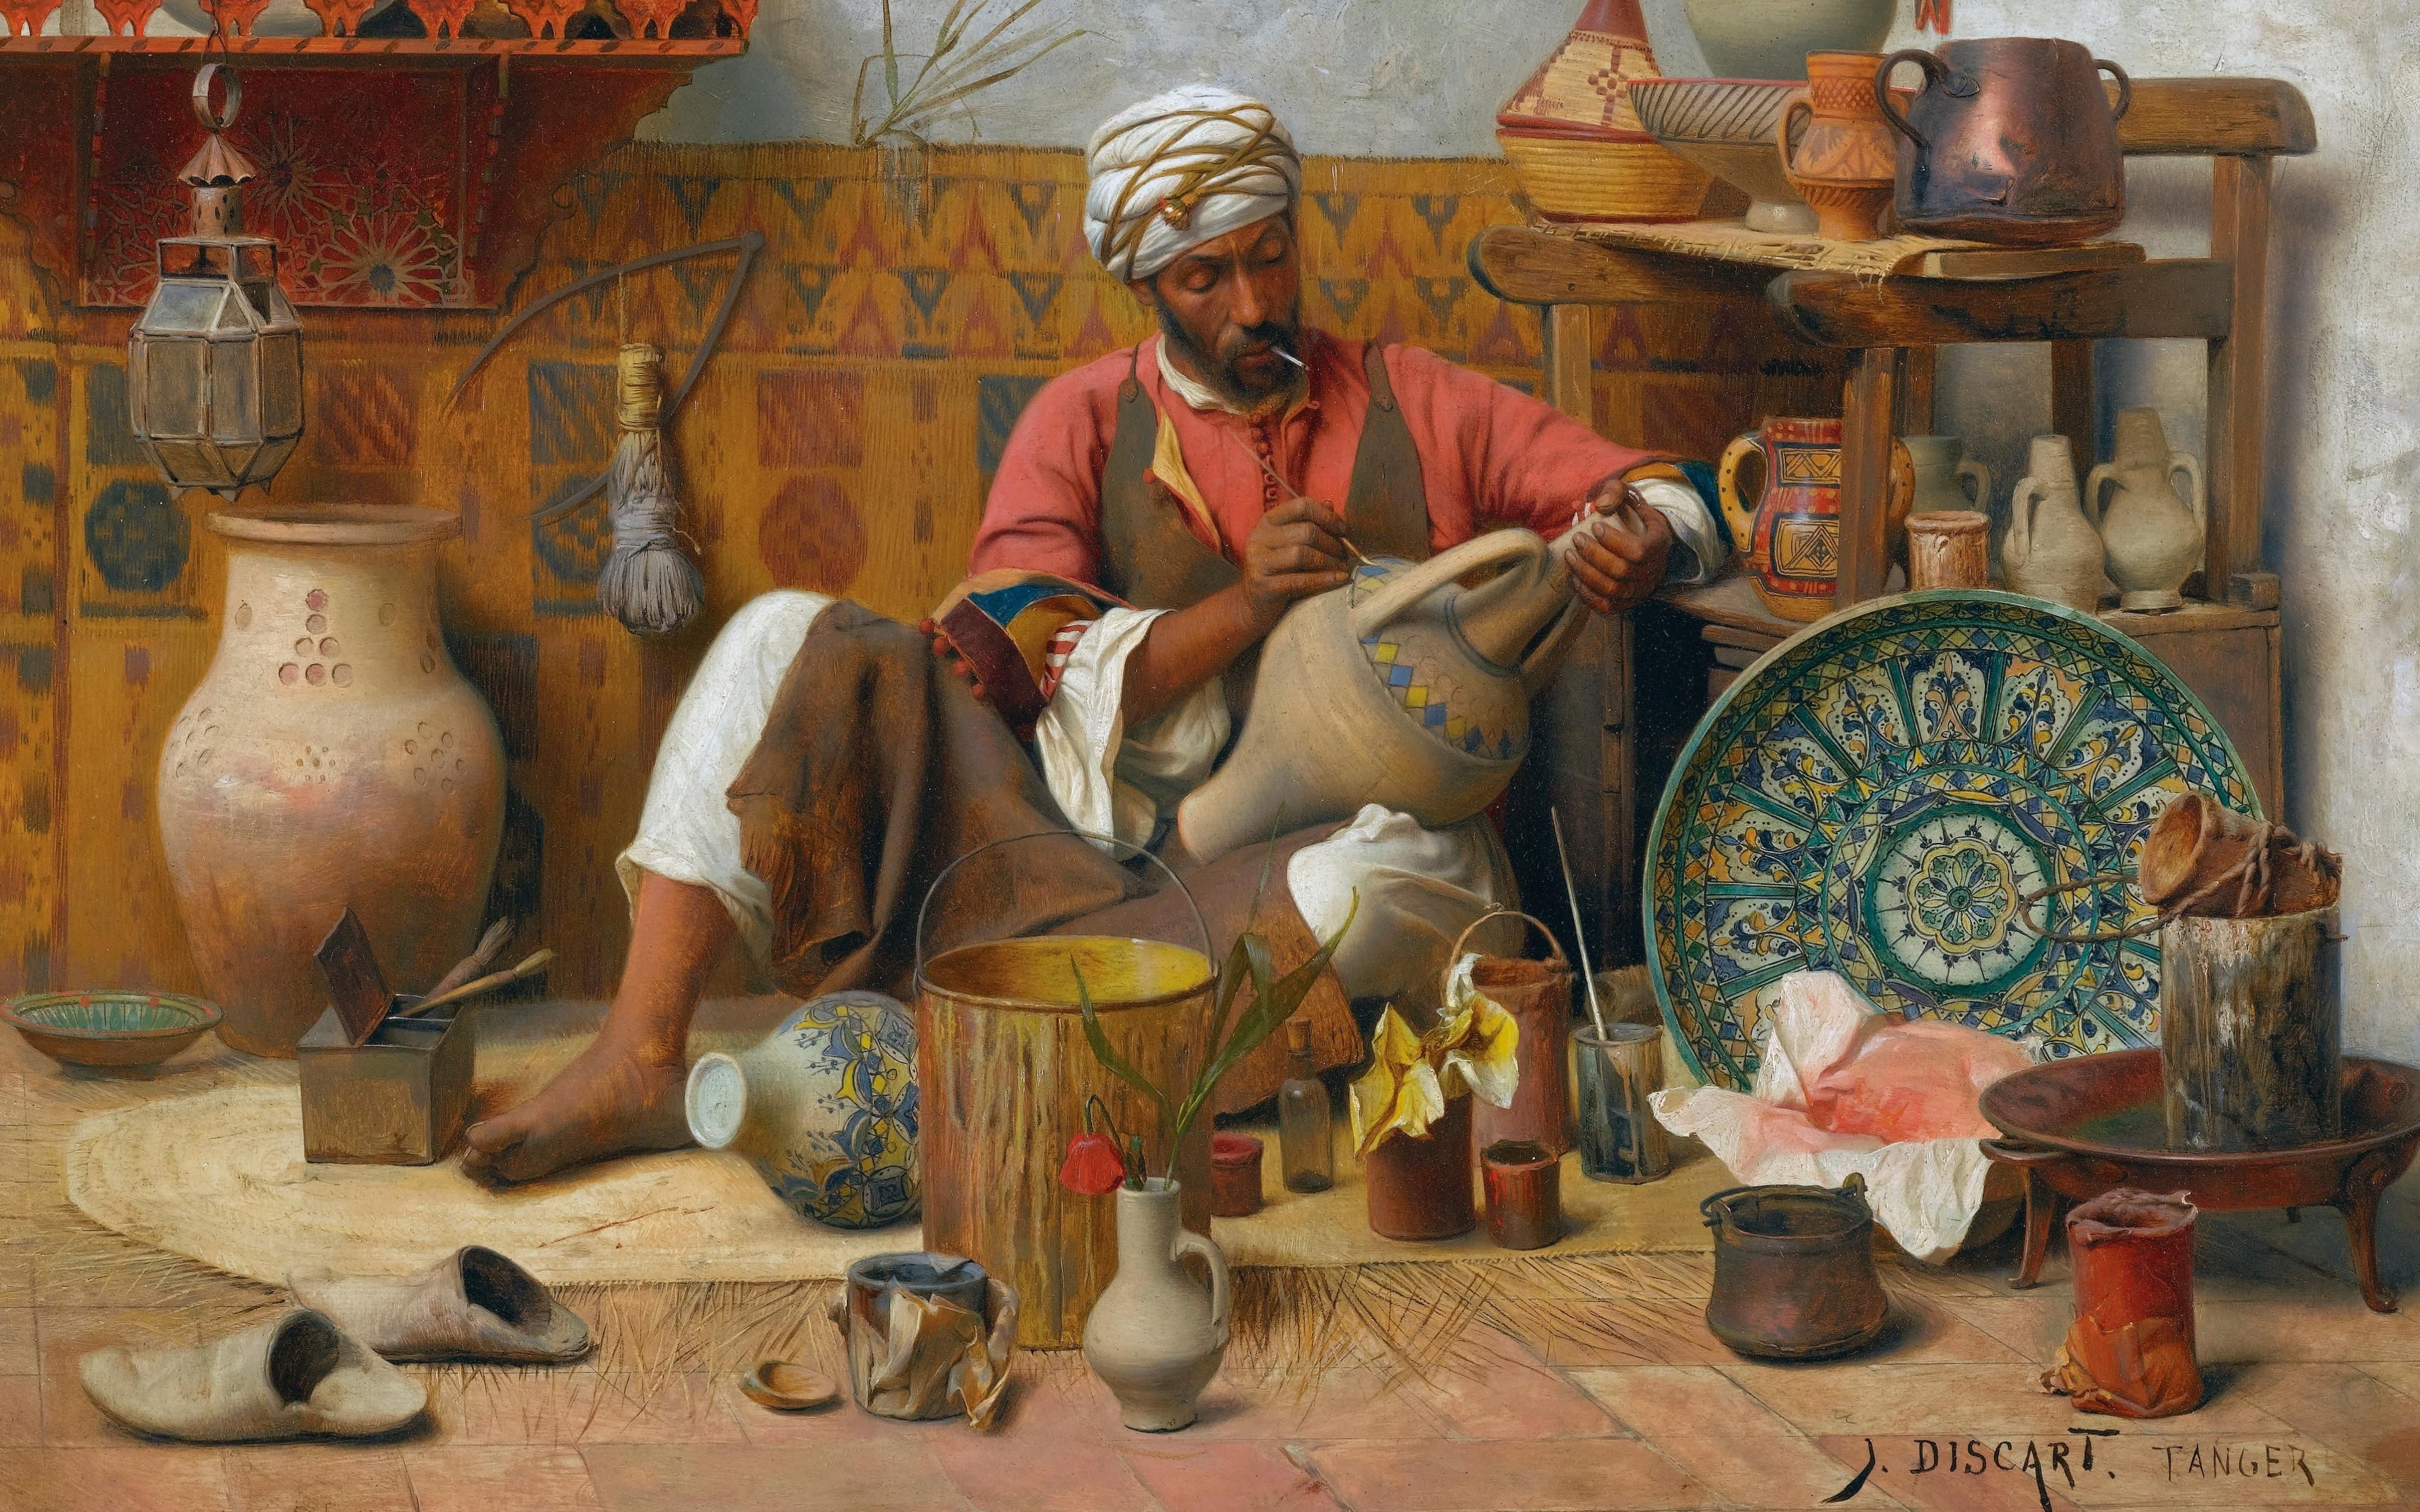 oil, canvas, French painter, 1910, Jean Discart, pottery, The Pottery Workshop